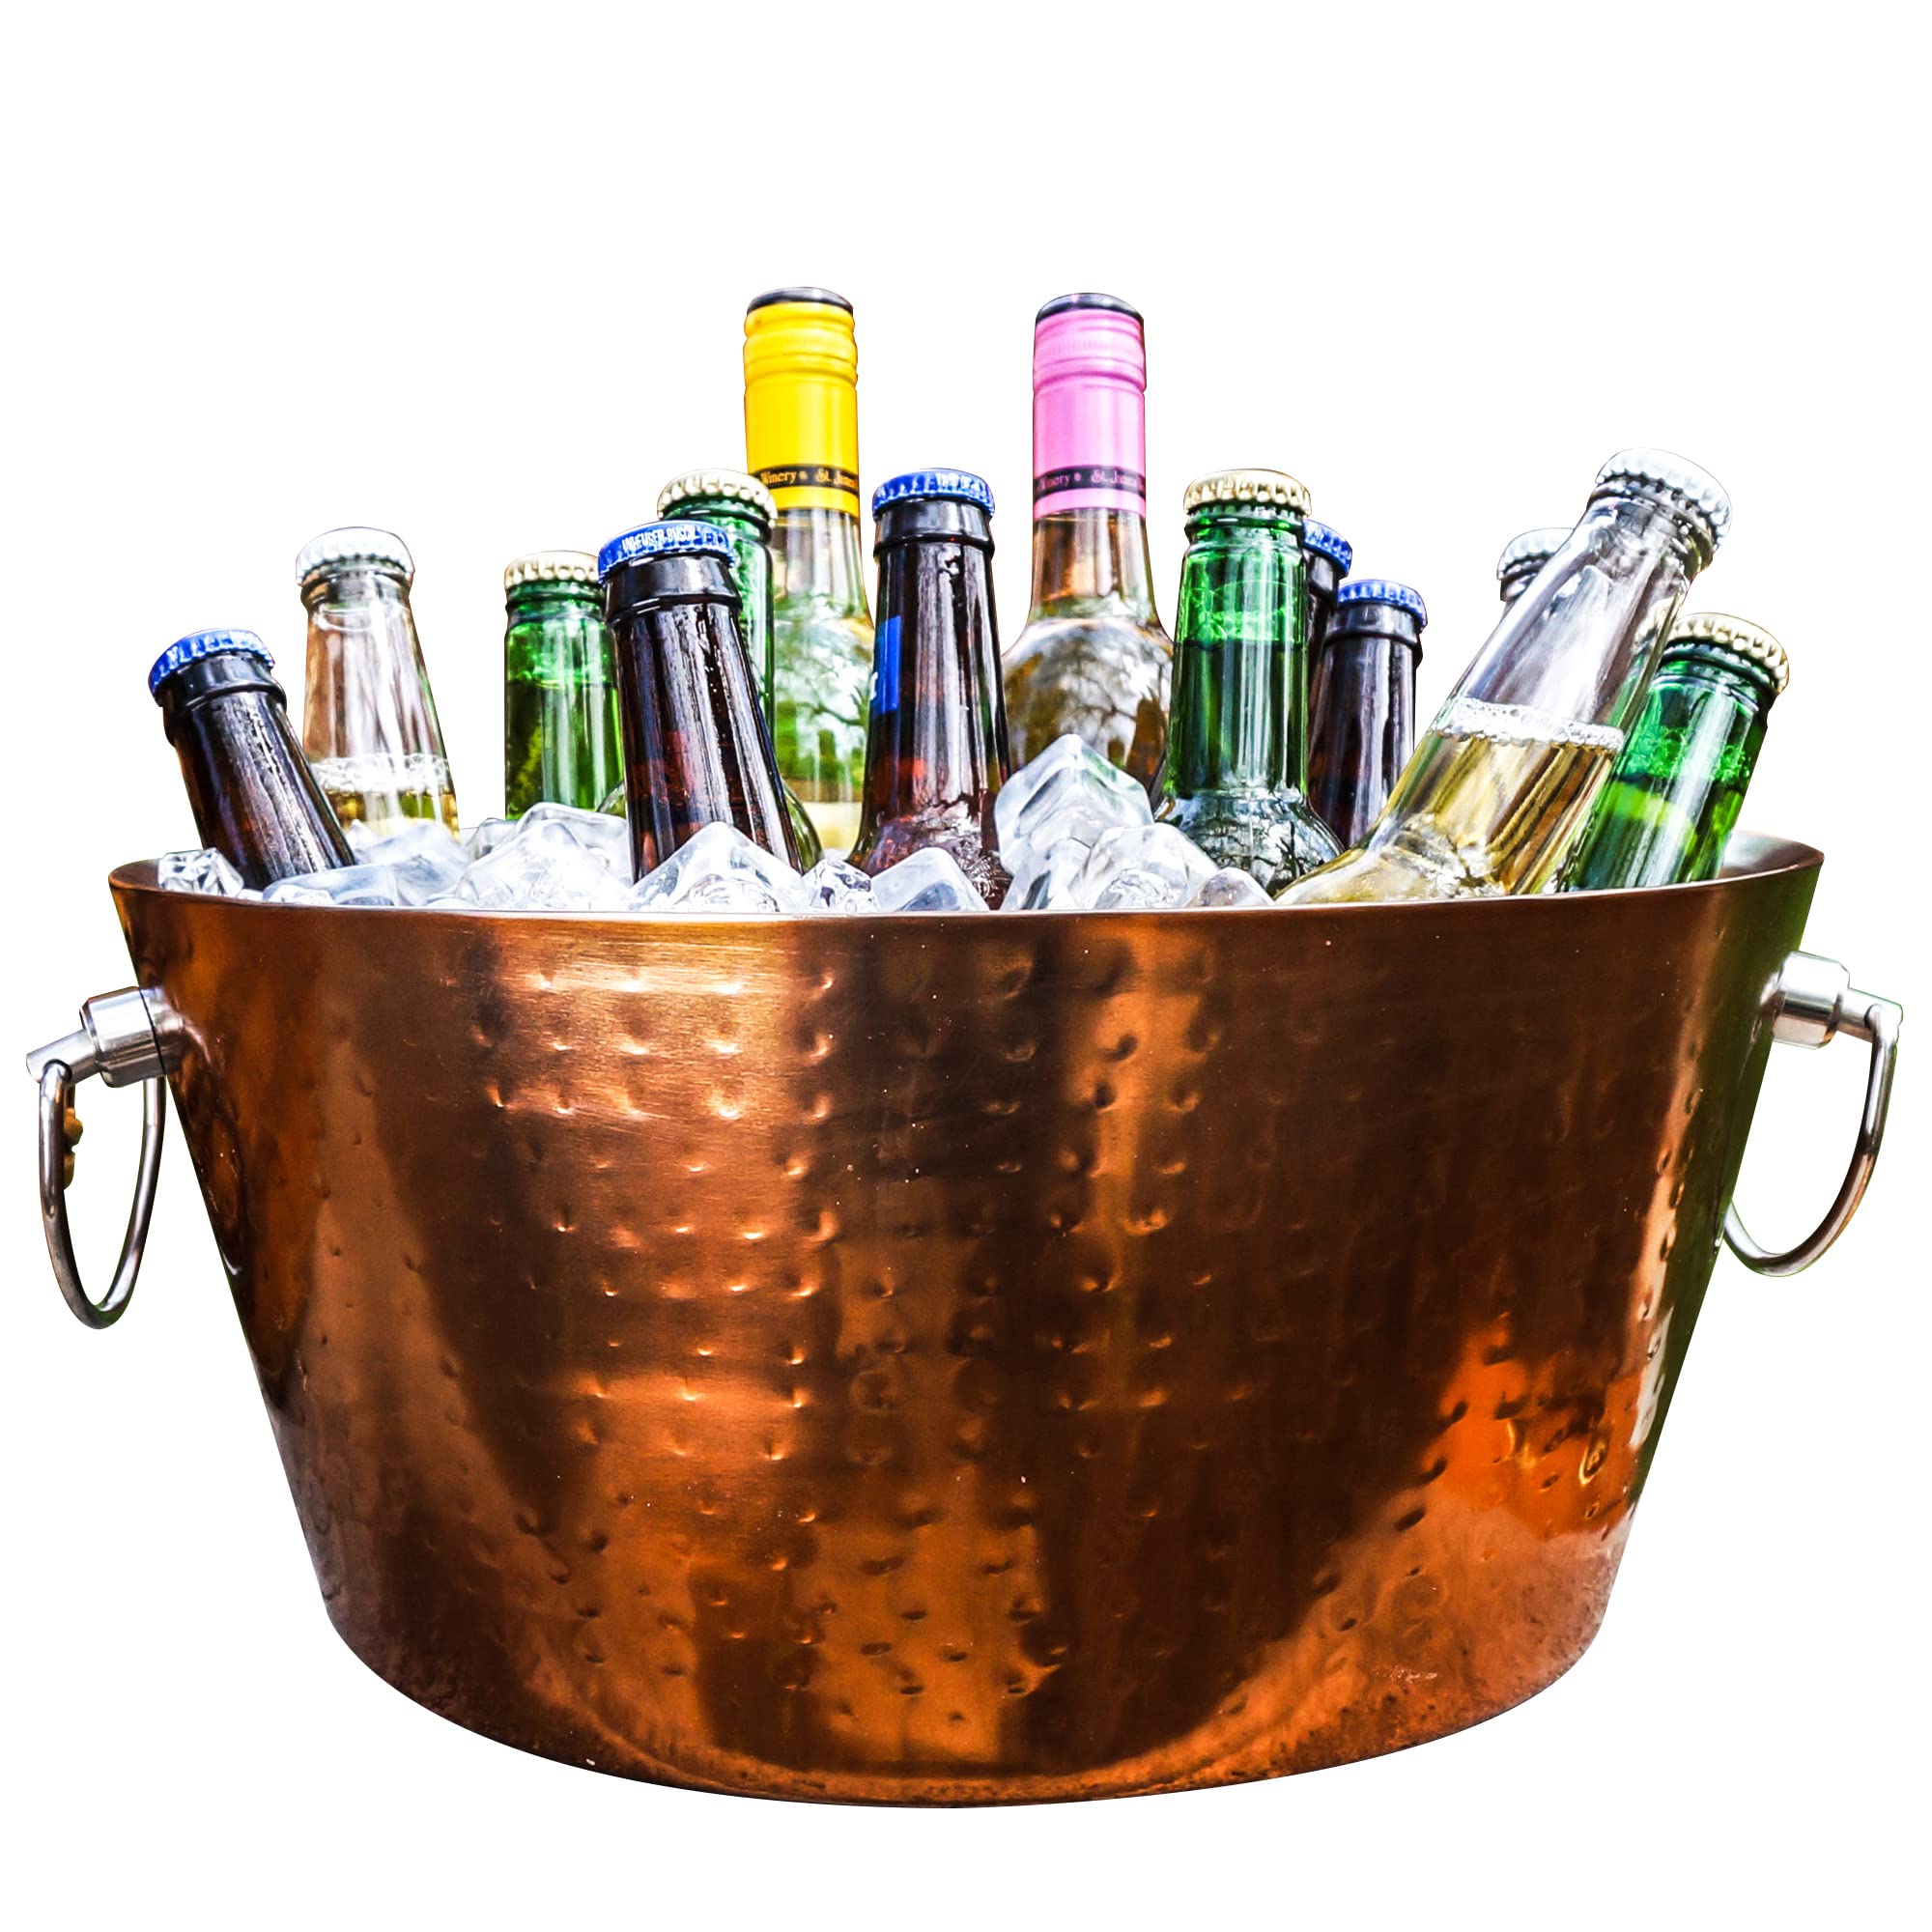 BREKX Rose Copper Hammered Stainless-Steel Beverage Tub, Double-Walled Insulated Anchored Drink Tub & Ice Bucket with Double Hinged Handles, Drink Chiller for Parties, 12 Quarts